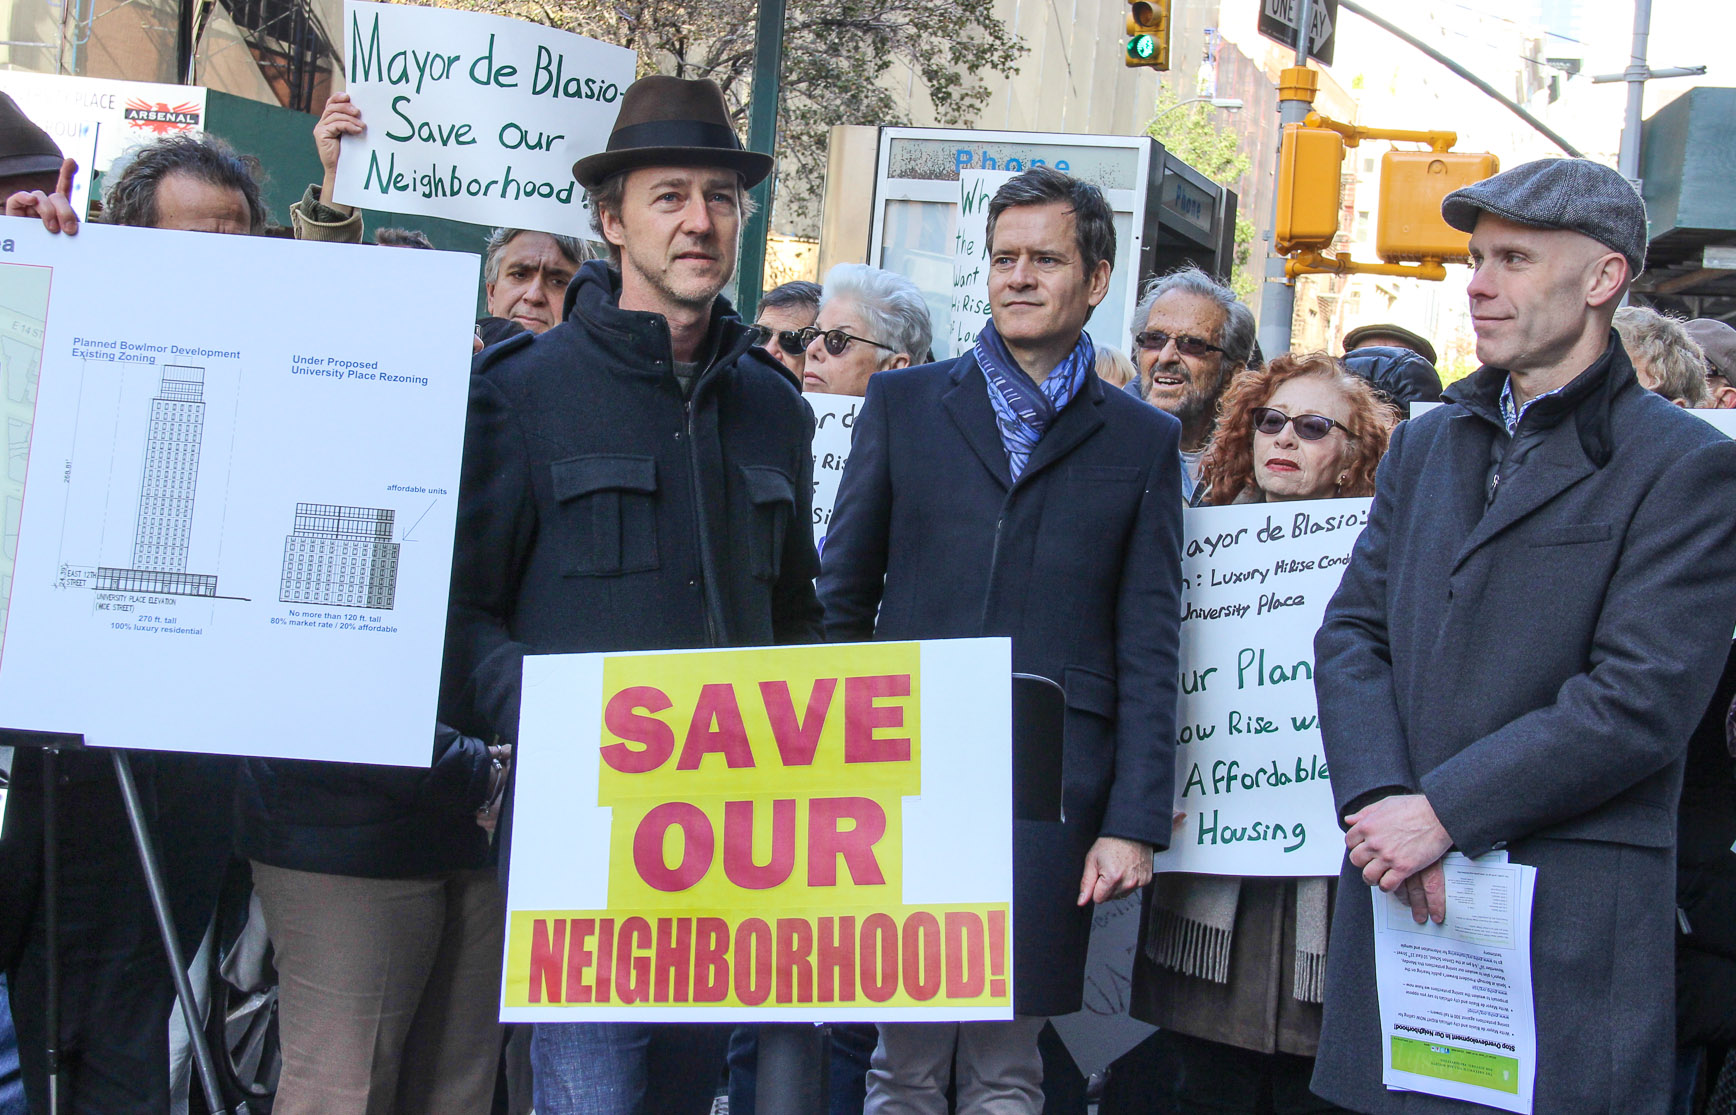 Actor Edward Norton, speaking, at center, said that development can't be allowed to "compromise the city's DNA." To the right of him are state Senator Brad Hoylman and preservationist Andrew Berman. At left, C.B. 2 Chairperson Tobi Bergman, holds up comparative renderings of the current Macklowe project and how it would look -- much squatter -- under the proposed rezoning. Photos by Tequila Minsky